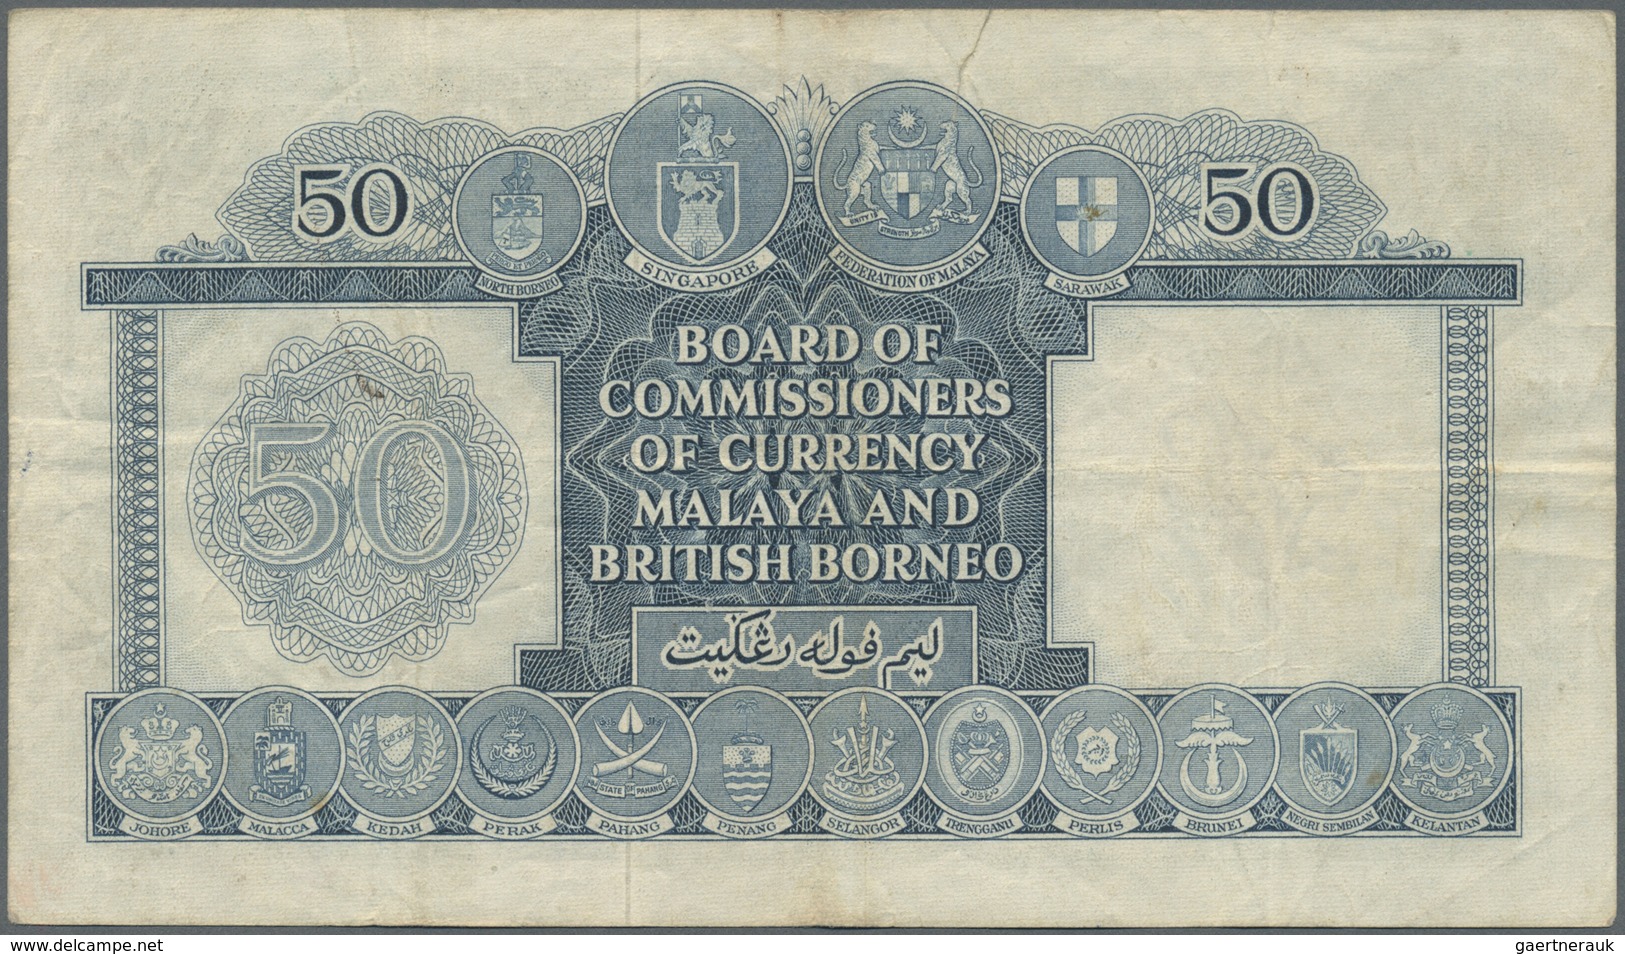 Malaya & British Borneo: 50 Dollars 1953 P. 4a, Used With Folds And Creases, No Holes, One 1cm Tear - Malaysia